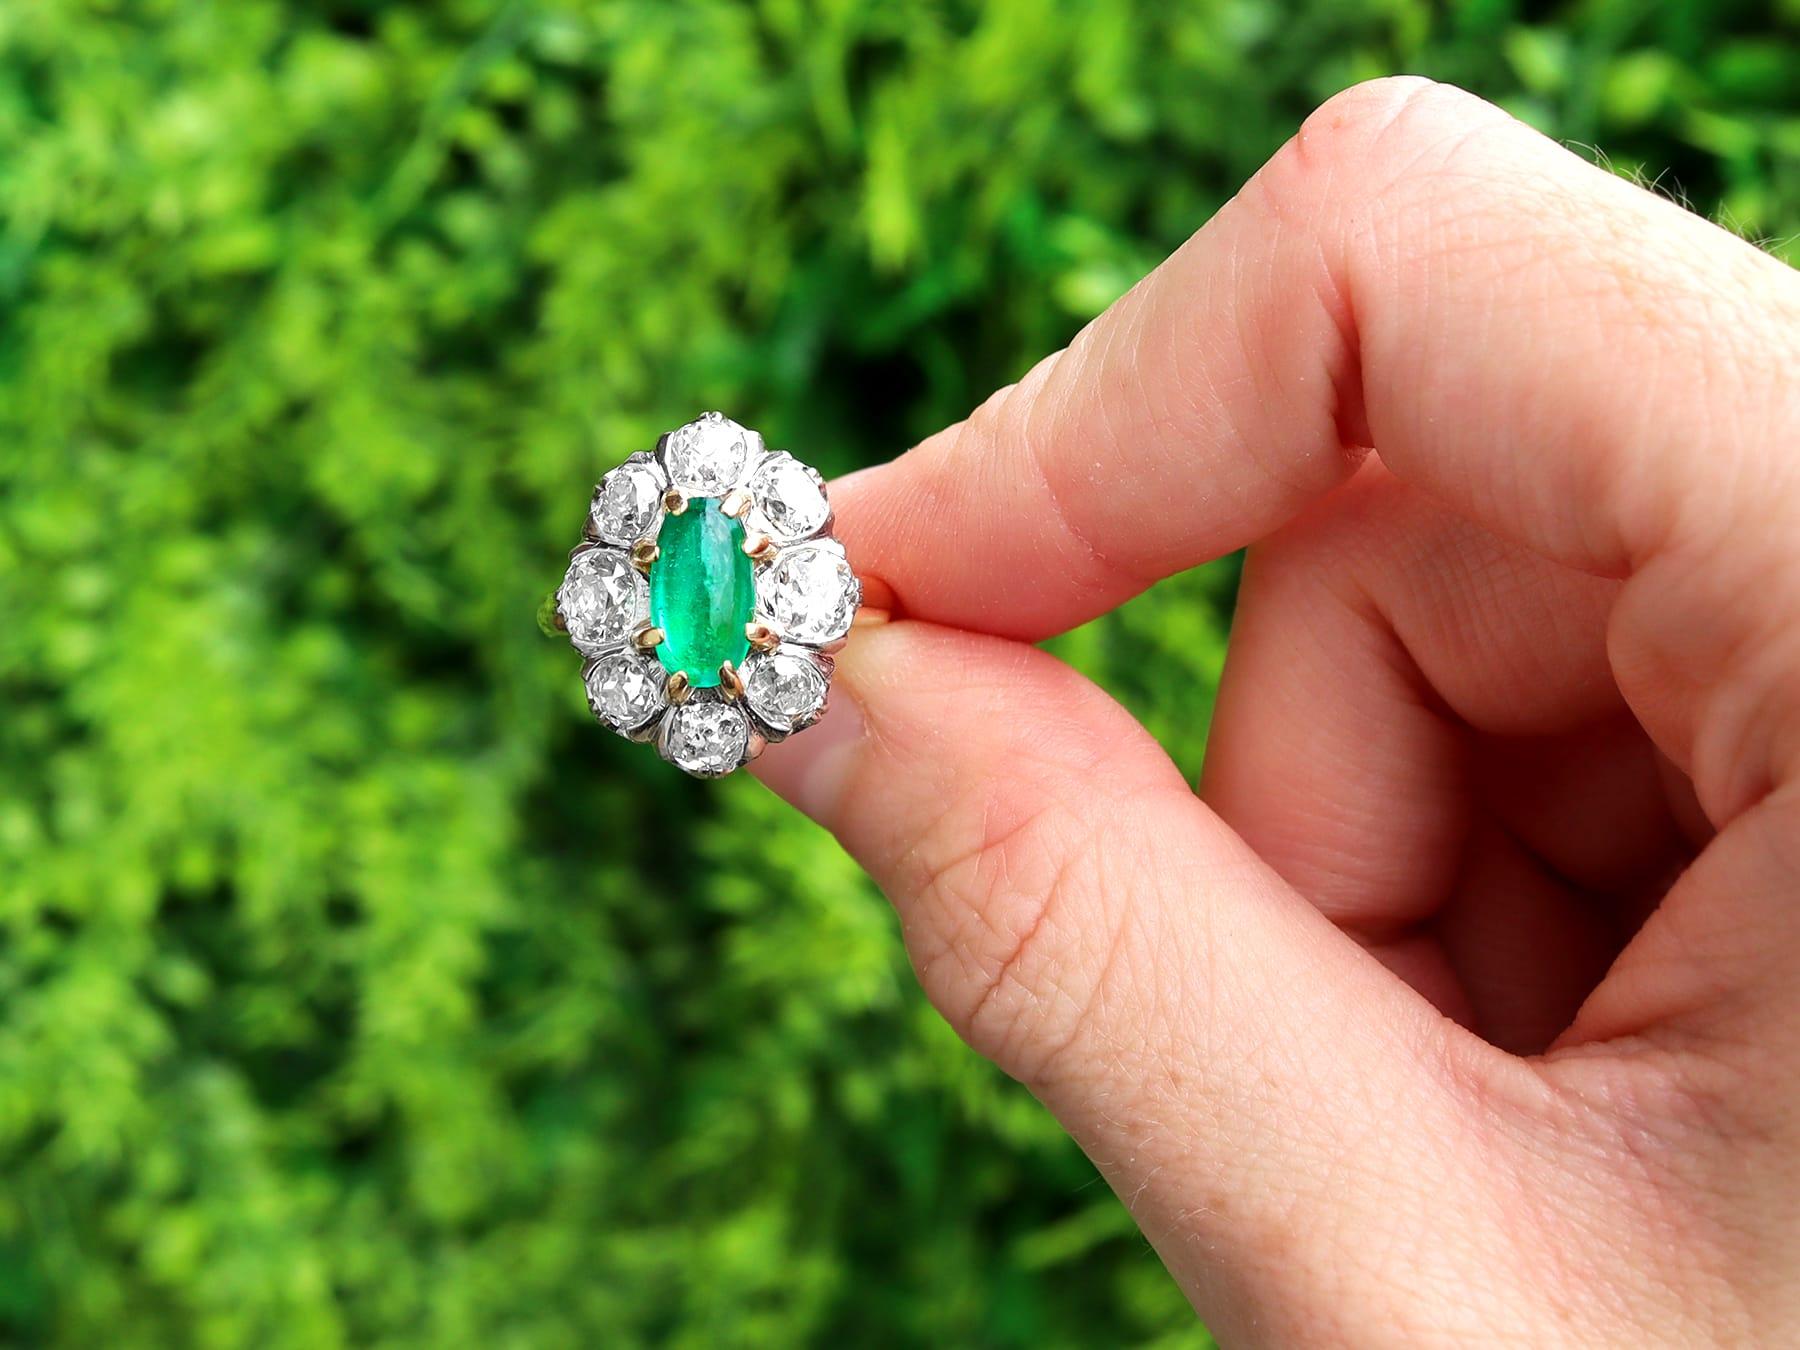 A stunning antique 1.50 carat Colombian emerald and 2.85 carat diamond, 18 karat yellow gold and platinum set dress ring; part of our diverse antique jewelry collections.

This stunning, fine and impressive cabochon cut emerald and diamond cluster